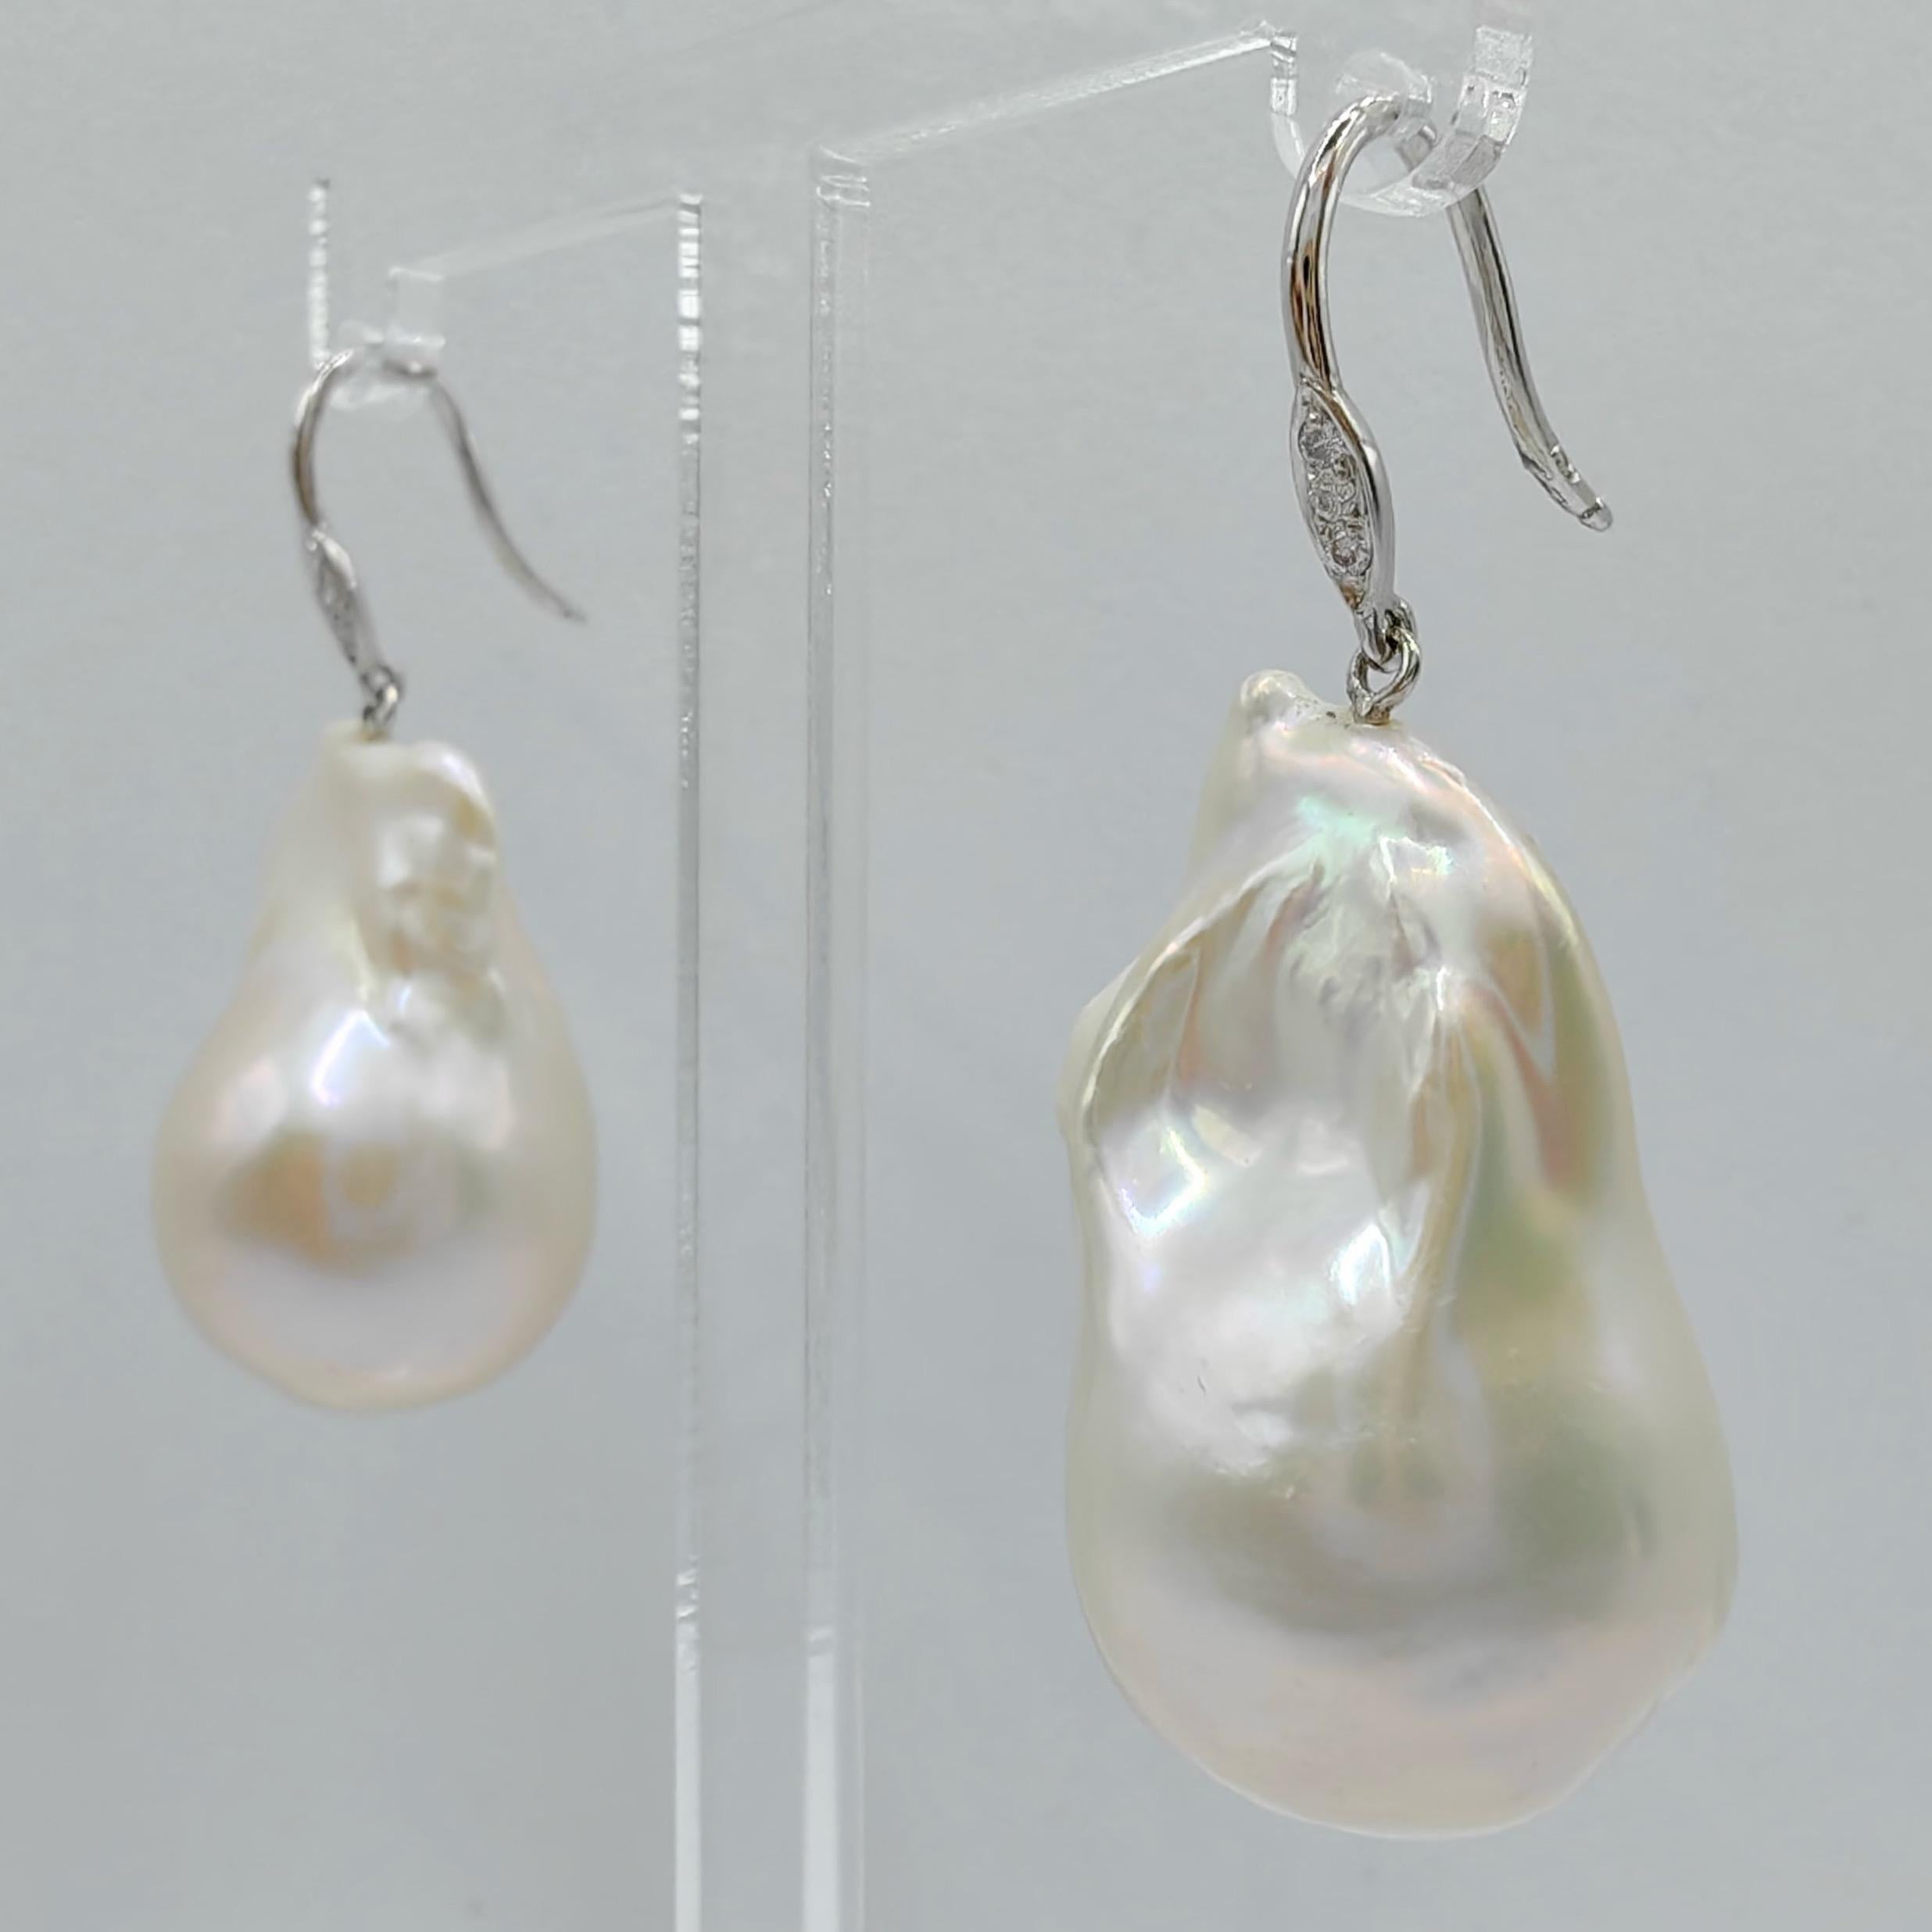 Contemporary Baroque Pearl Diamond Dangling Drop Earrings With 18K White Gold French Hooks